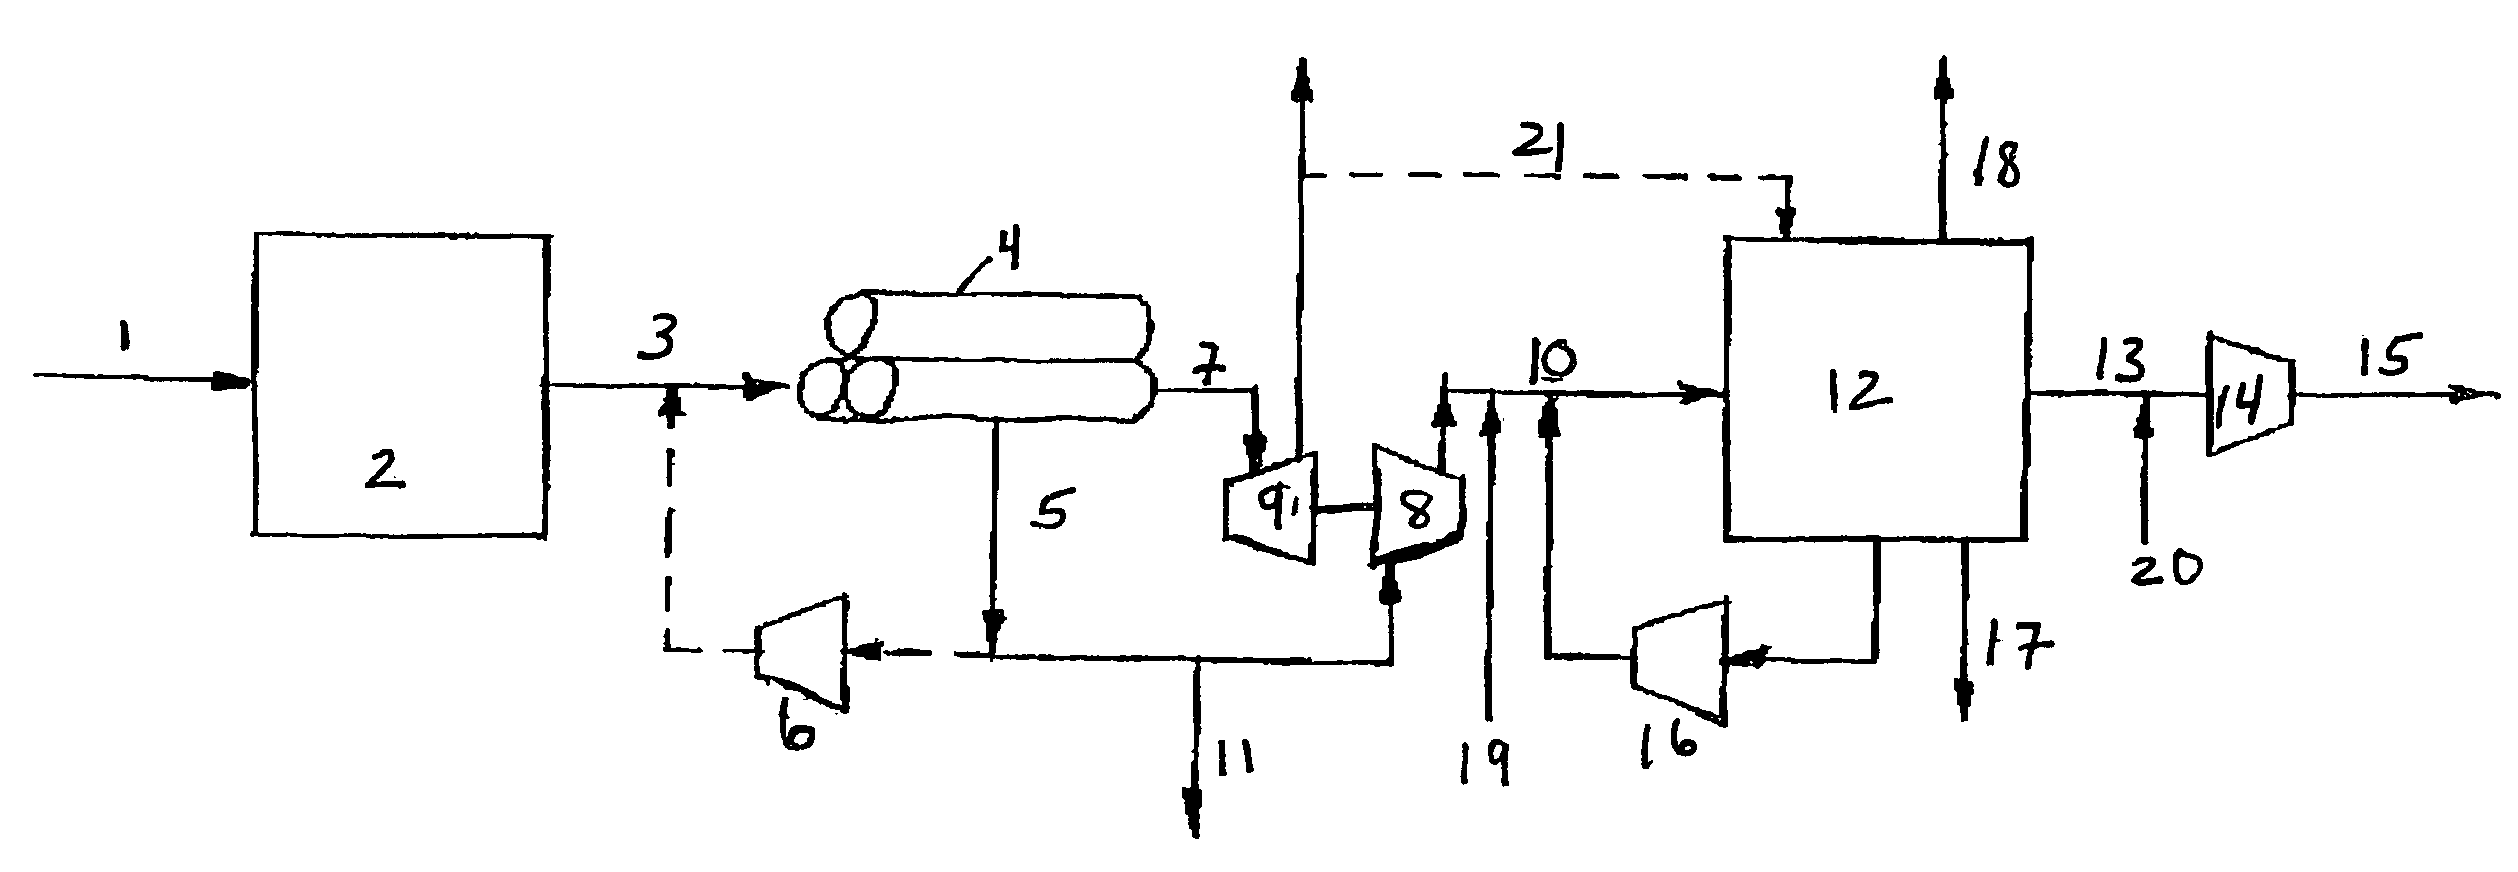 Process to remove nitrogen and/or carbon dioxide from methane-containing streams